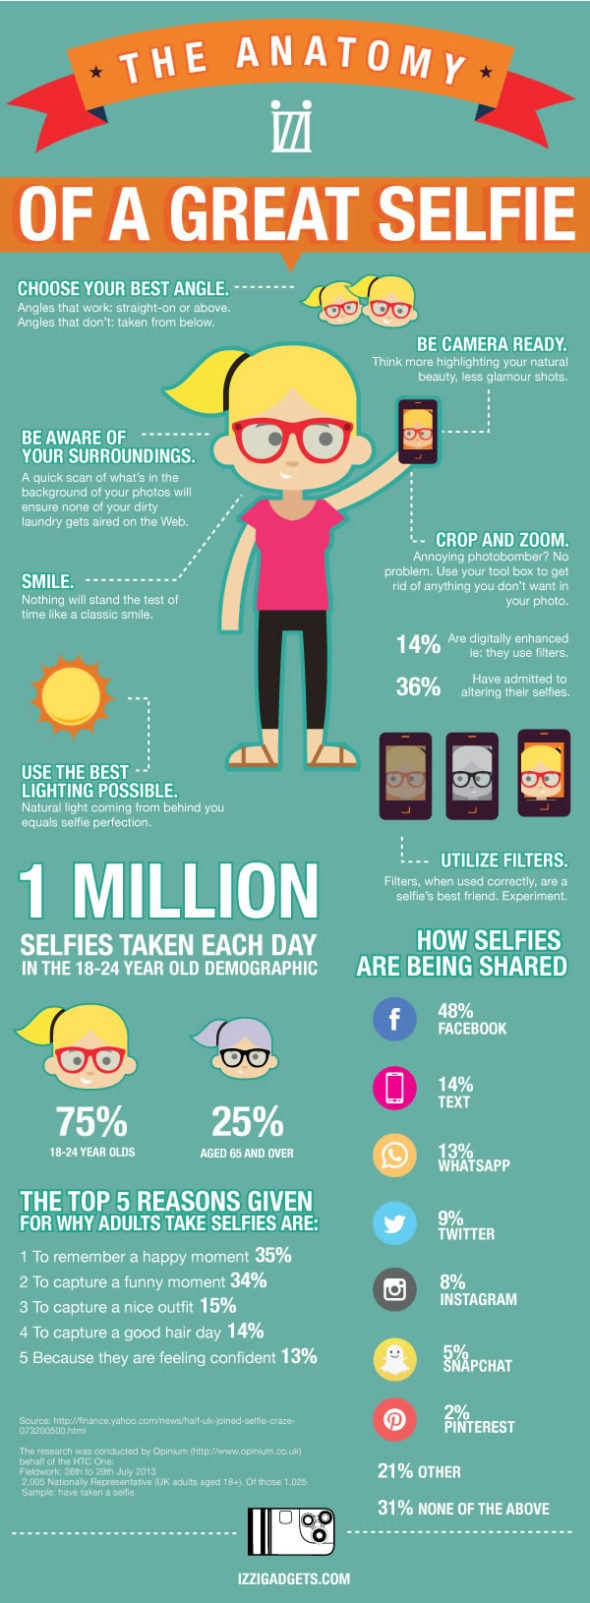 Infographic On The Anatomy Of A Great Selfie By Izzigadgets 